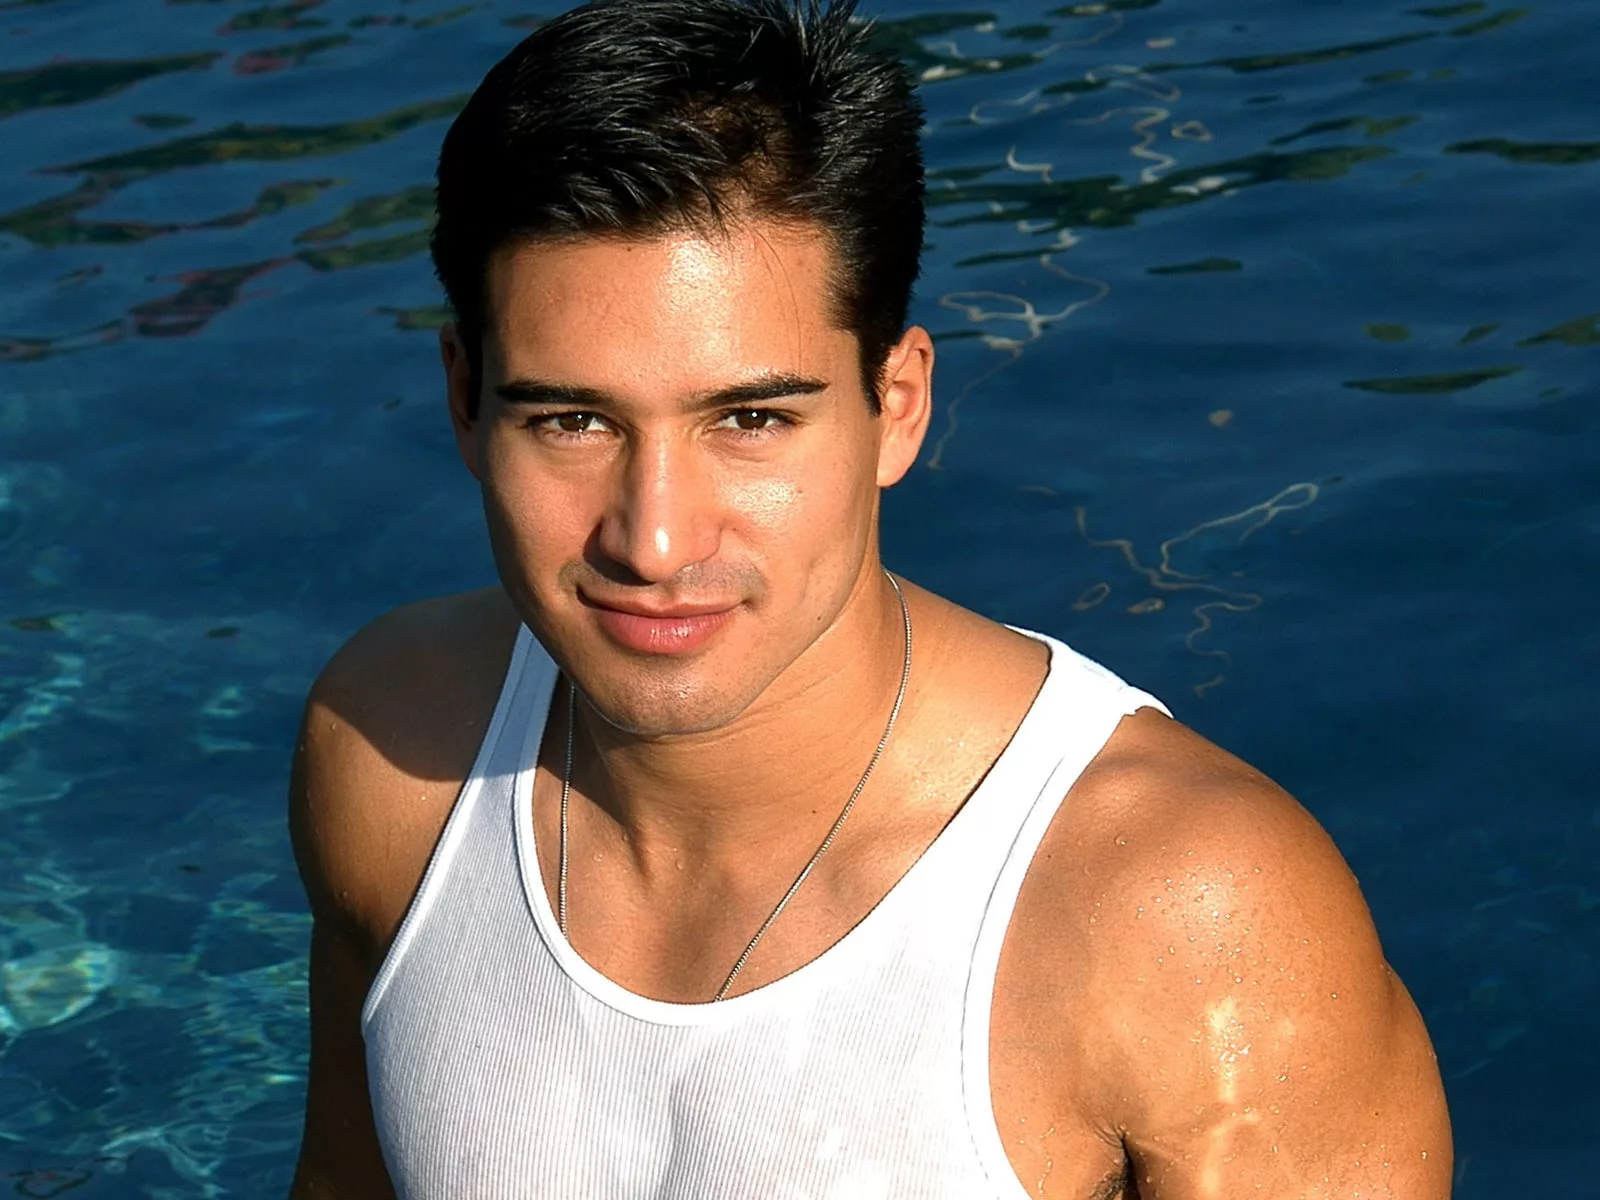 Watch Online Mario Lopez Nude Pics LEAKED – So Hot! | Free Download Latest Onlyfans Nudes Leaks, Naked, Penis Pics, XXX, NSFW, Cock Exposed, Porn, Sex Tape